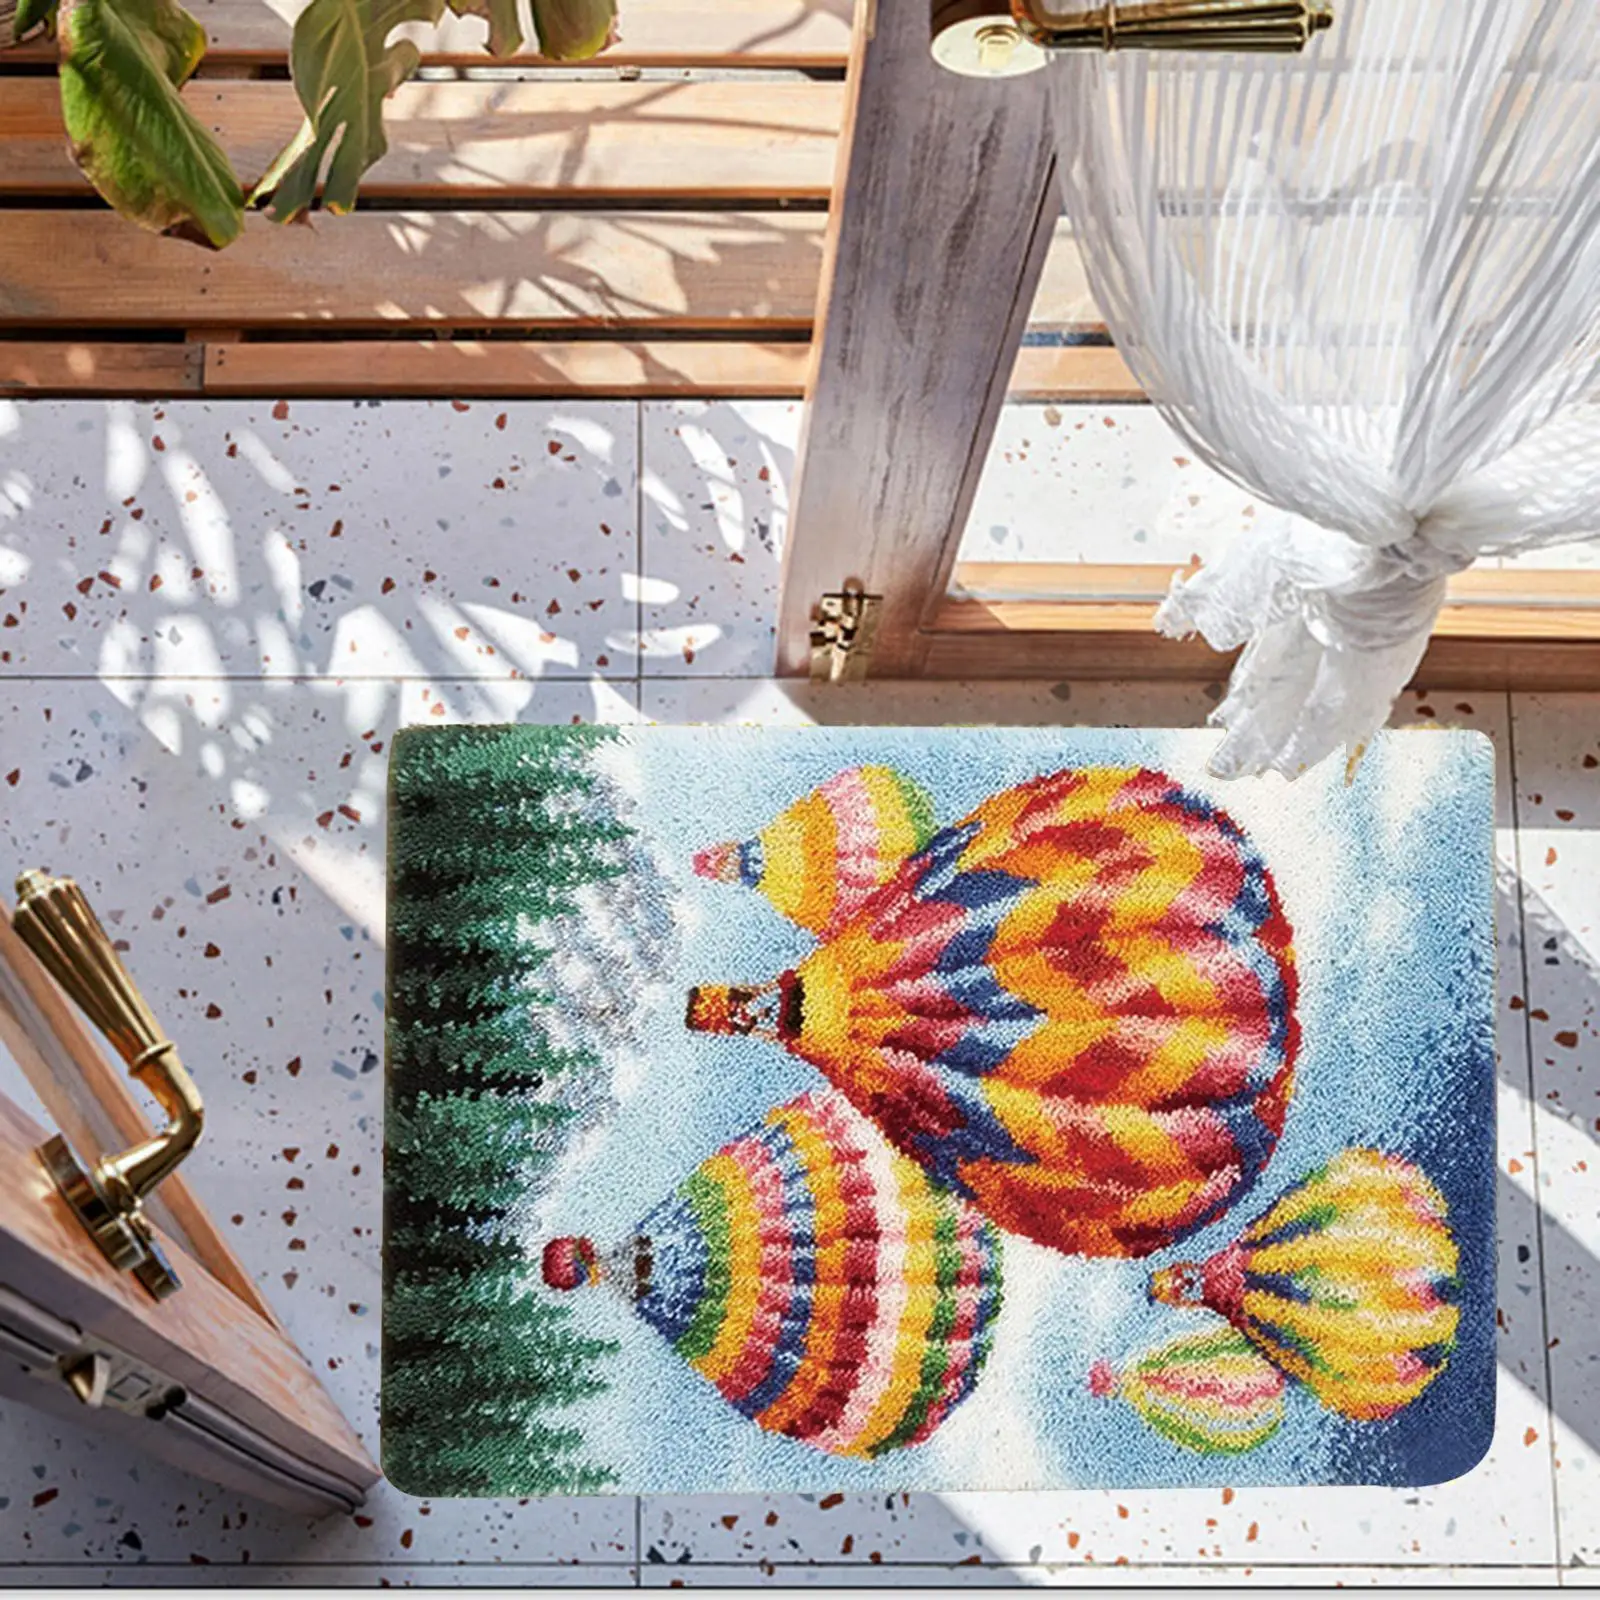  Rug Kits Carpet Embroidery Hot Air Balloon for Adults Kids Crafts